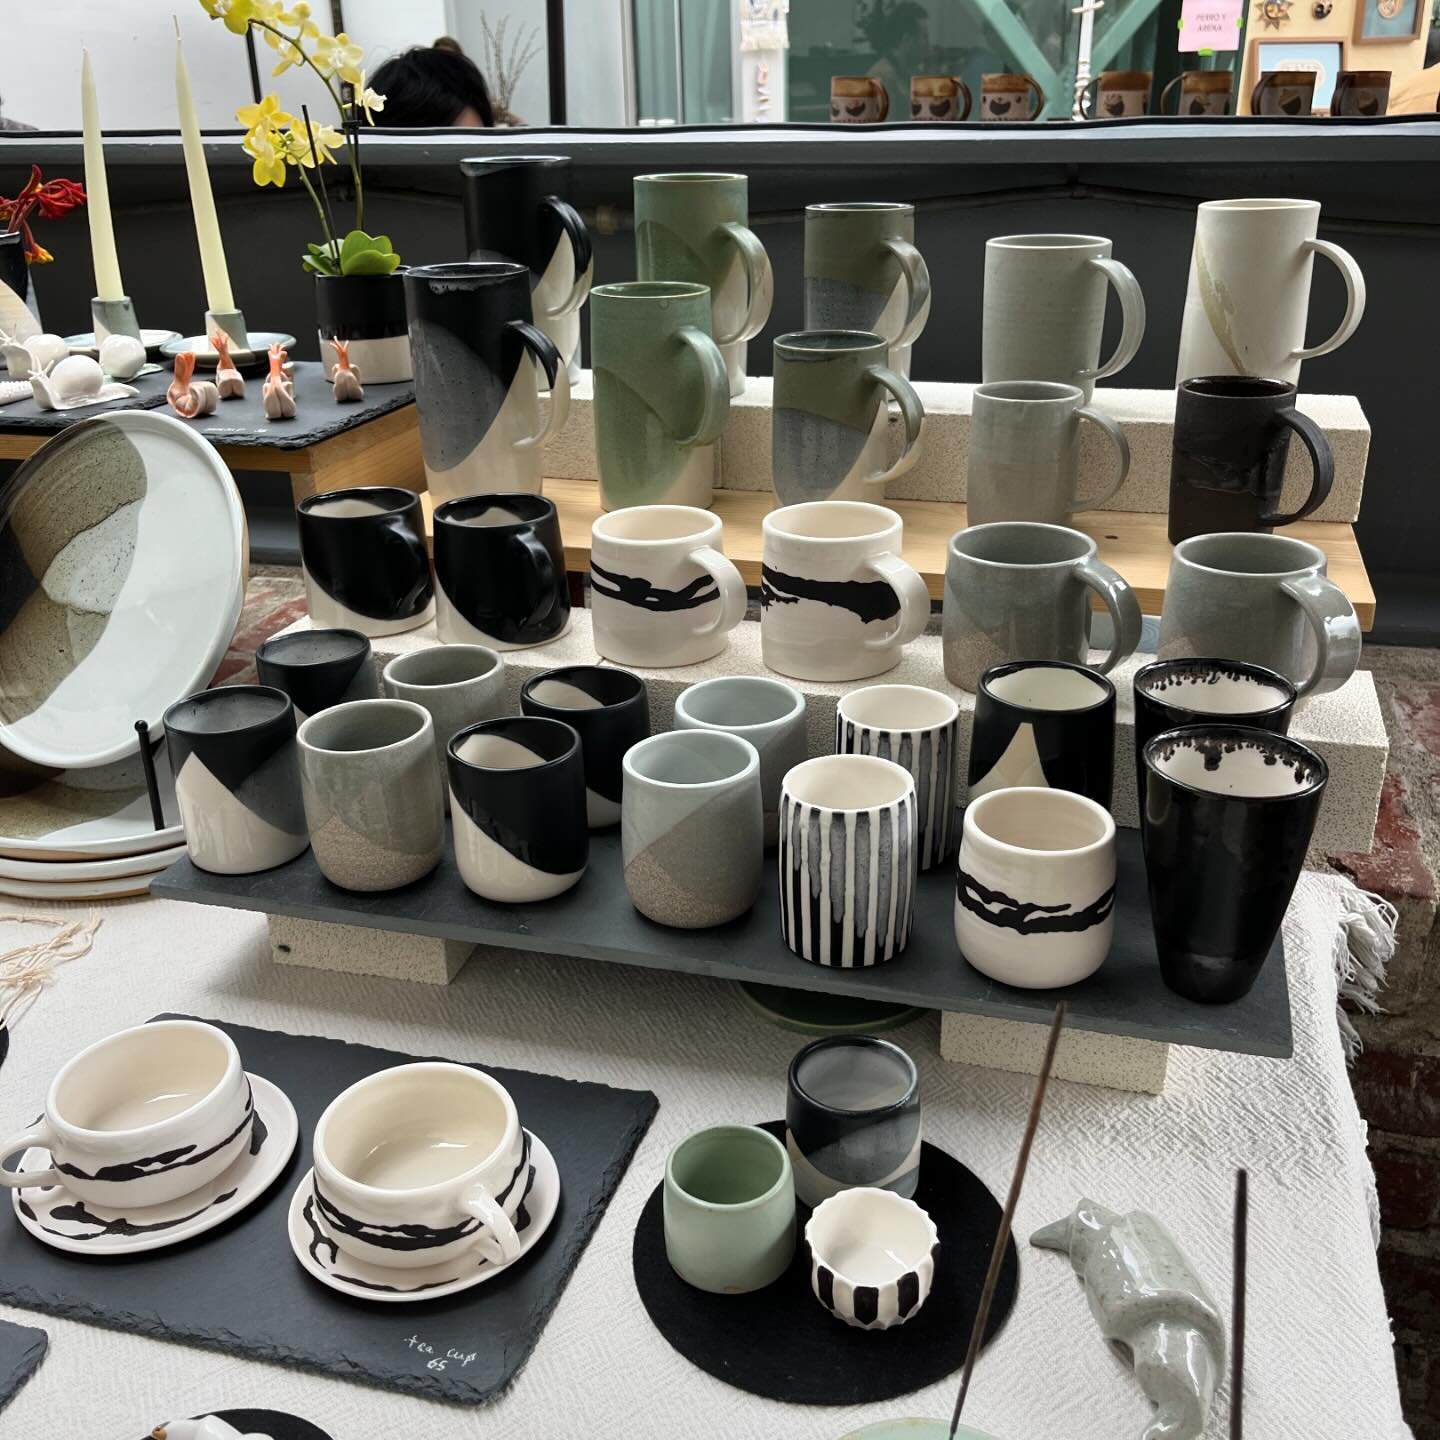 - my setup @craftcontemporary for this weekend -
.
.
.
.
.
.
.
#craftcontemporary #ceramicscupture